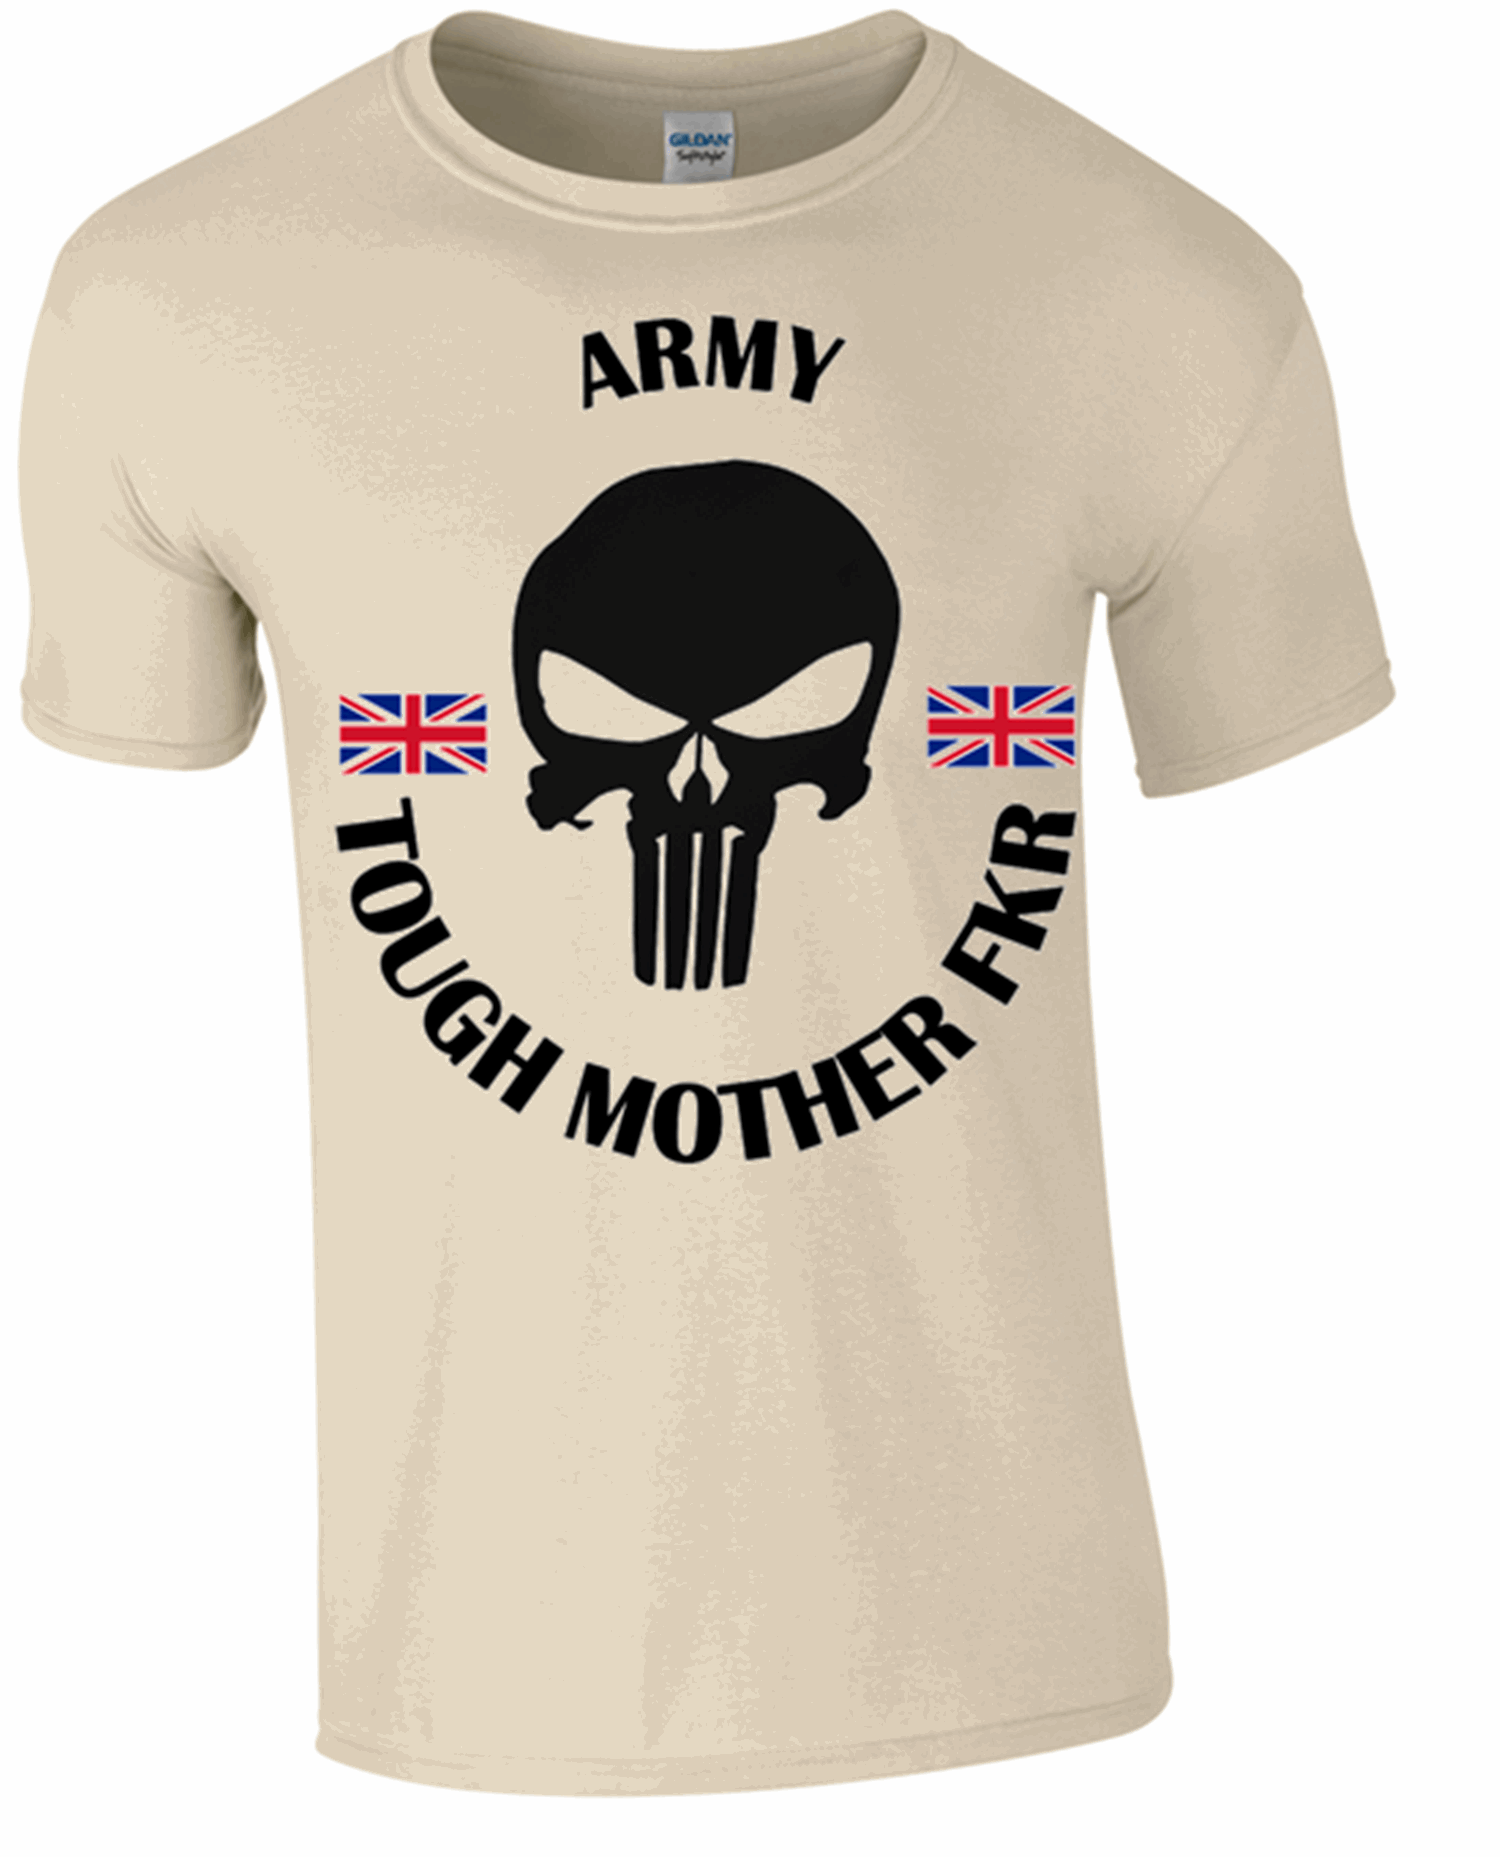 Army Tough Mother FKR T-Shirt - Army 1157 kit Sand / XL Army 1157 Kit Veterans Owned Business